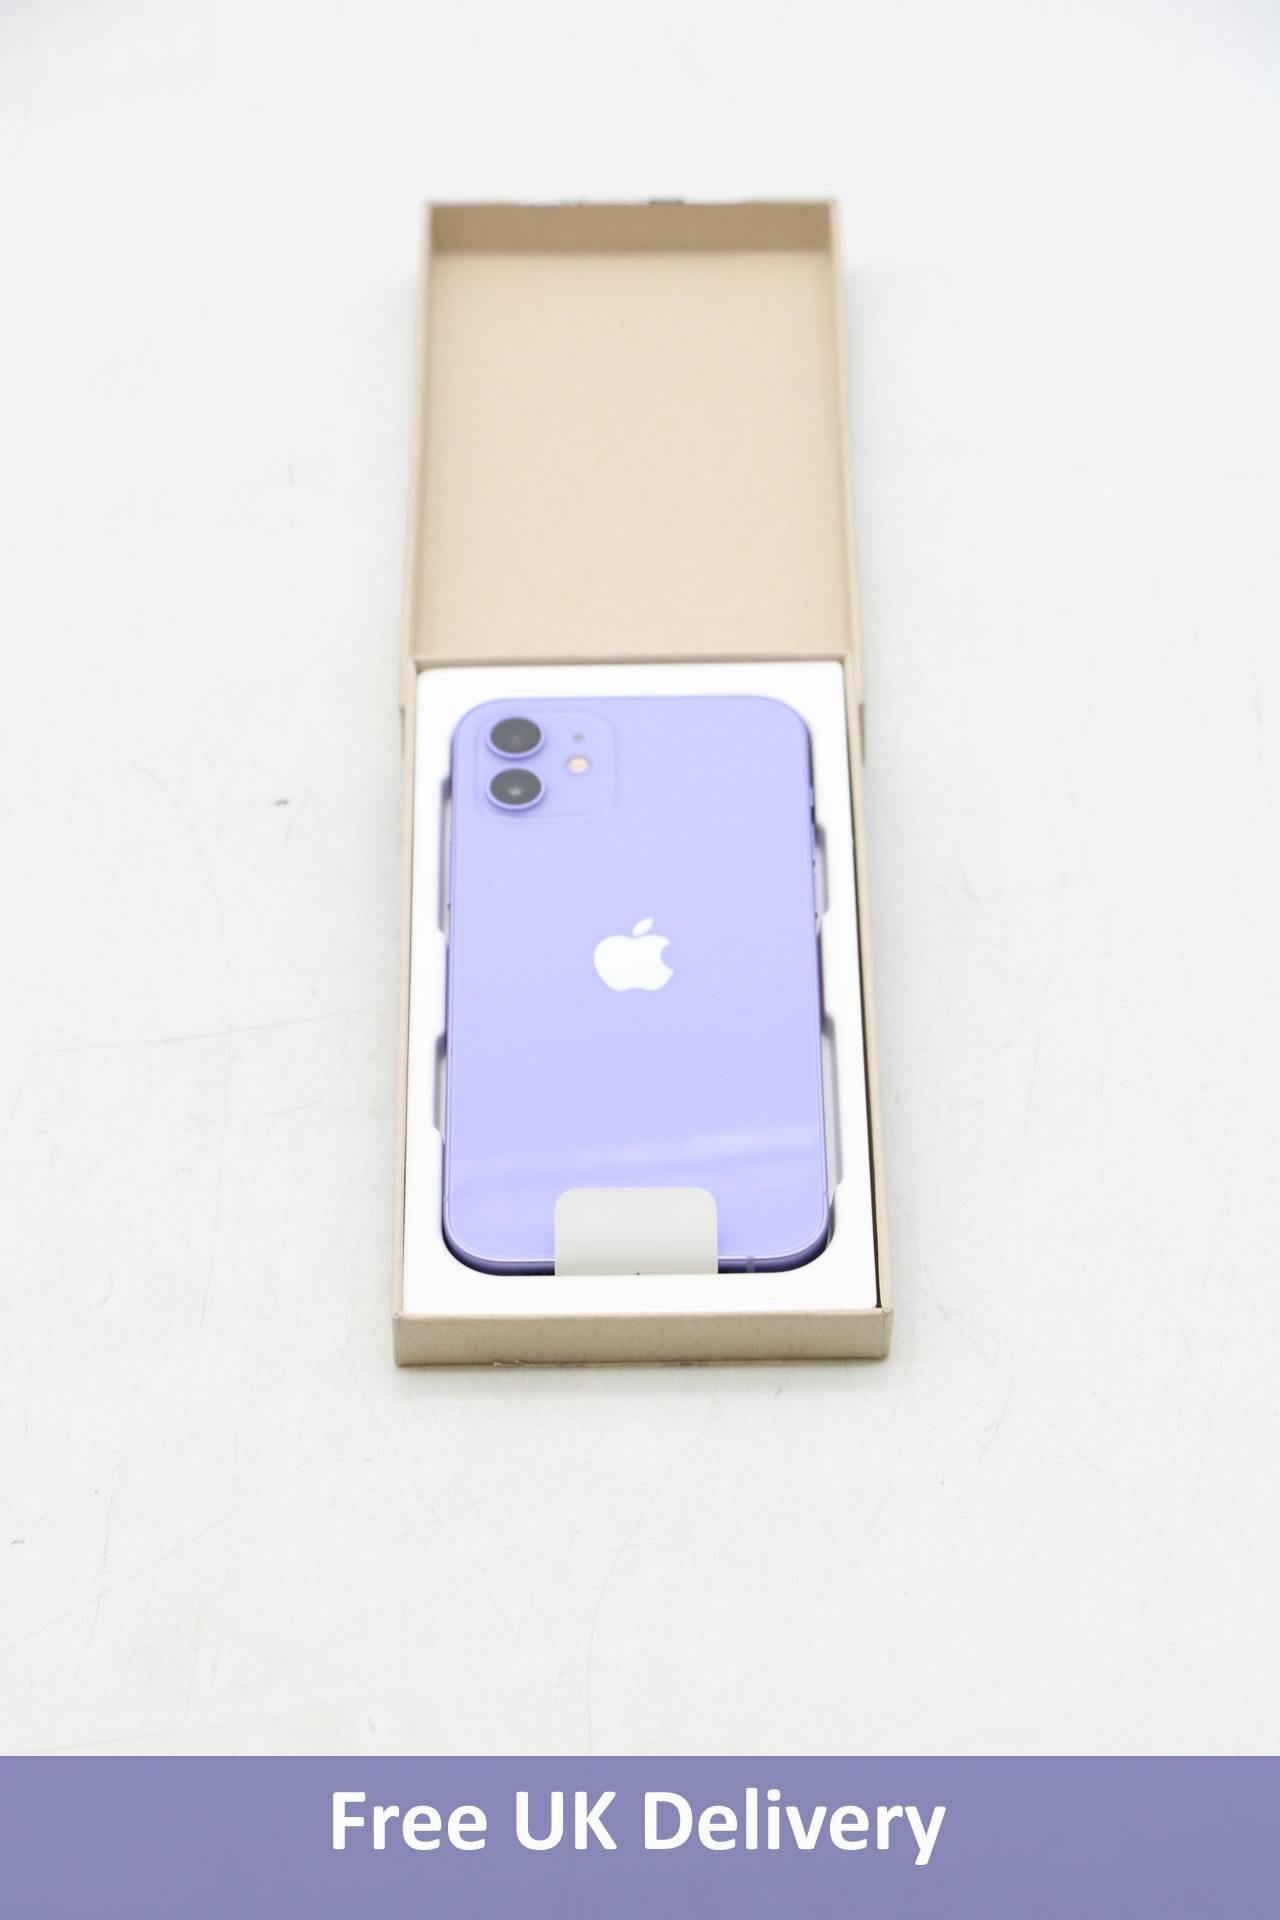 Apple iPhone 12, 64GB, Purple. Refurbished, mint condition. SIM locked, network provider unknown. Ch